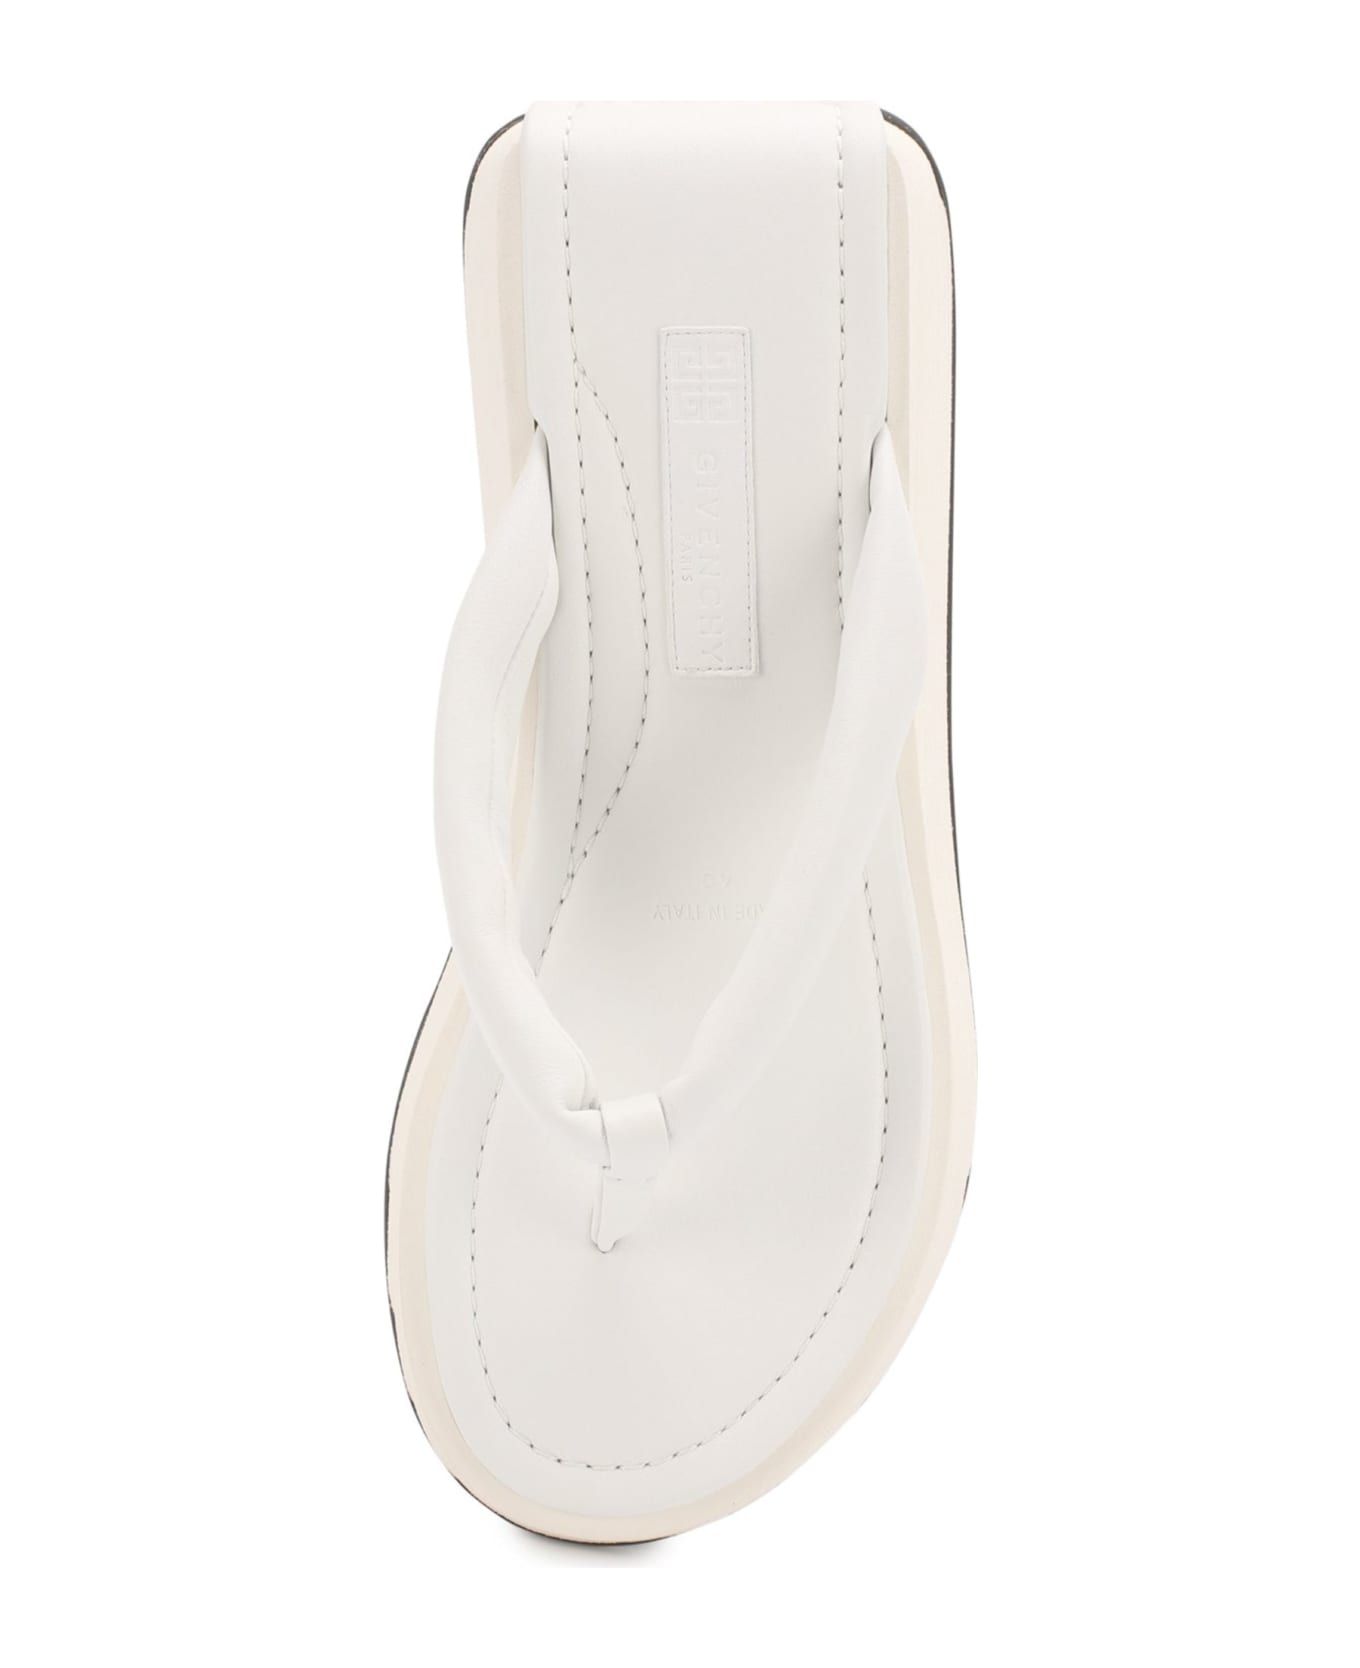 Givenchy Kyoto Sandals - White